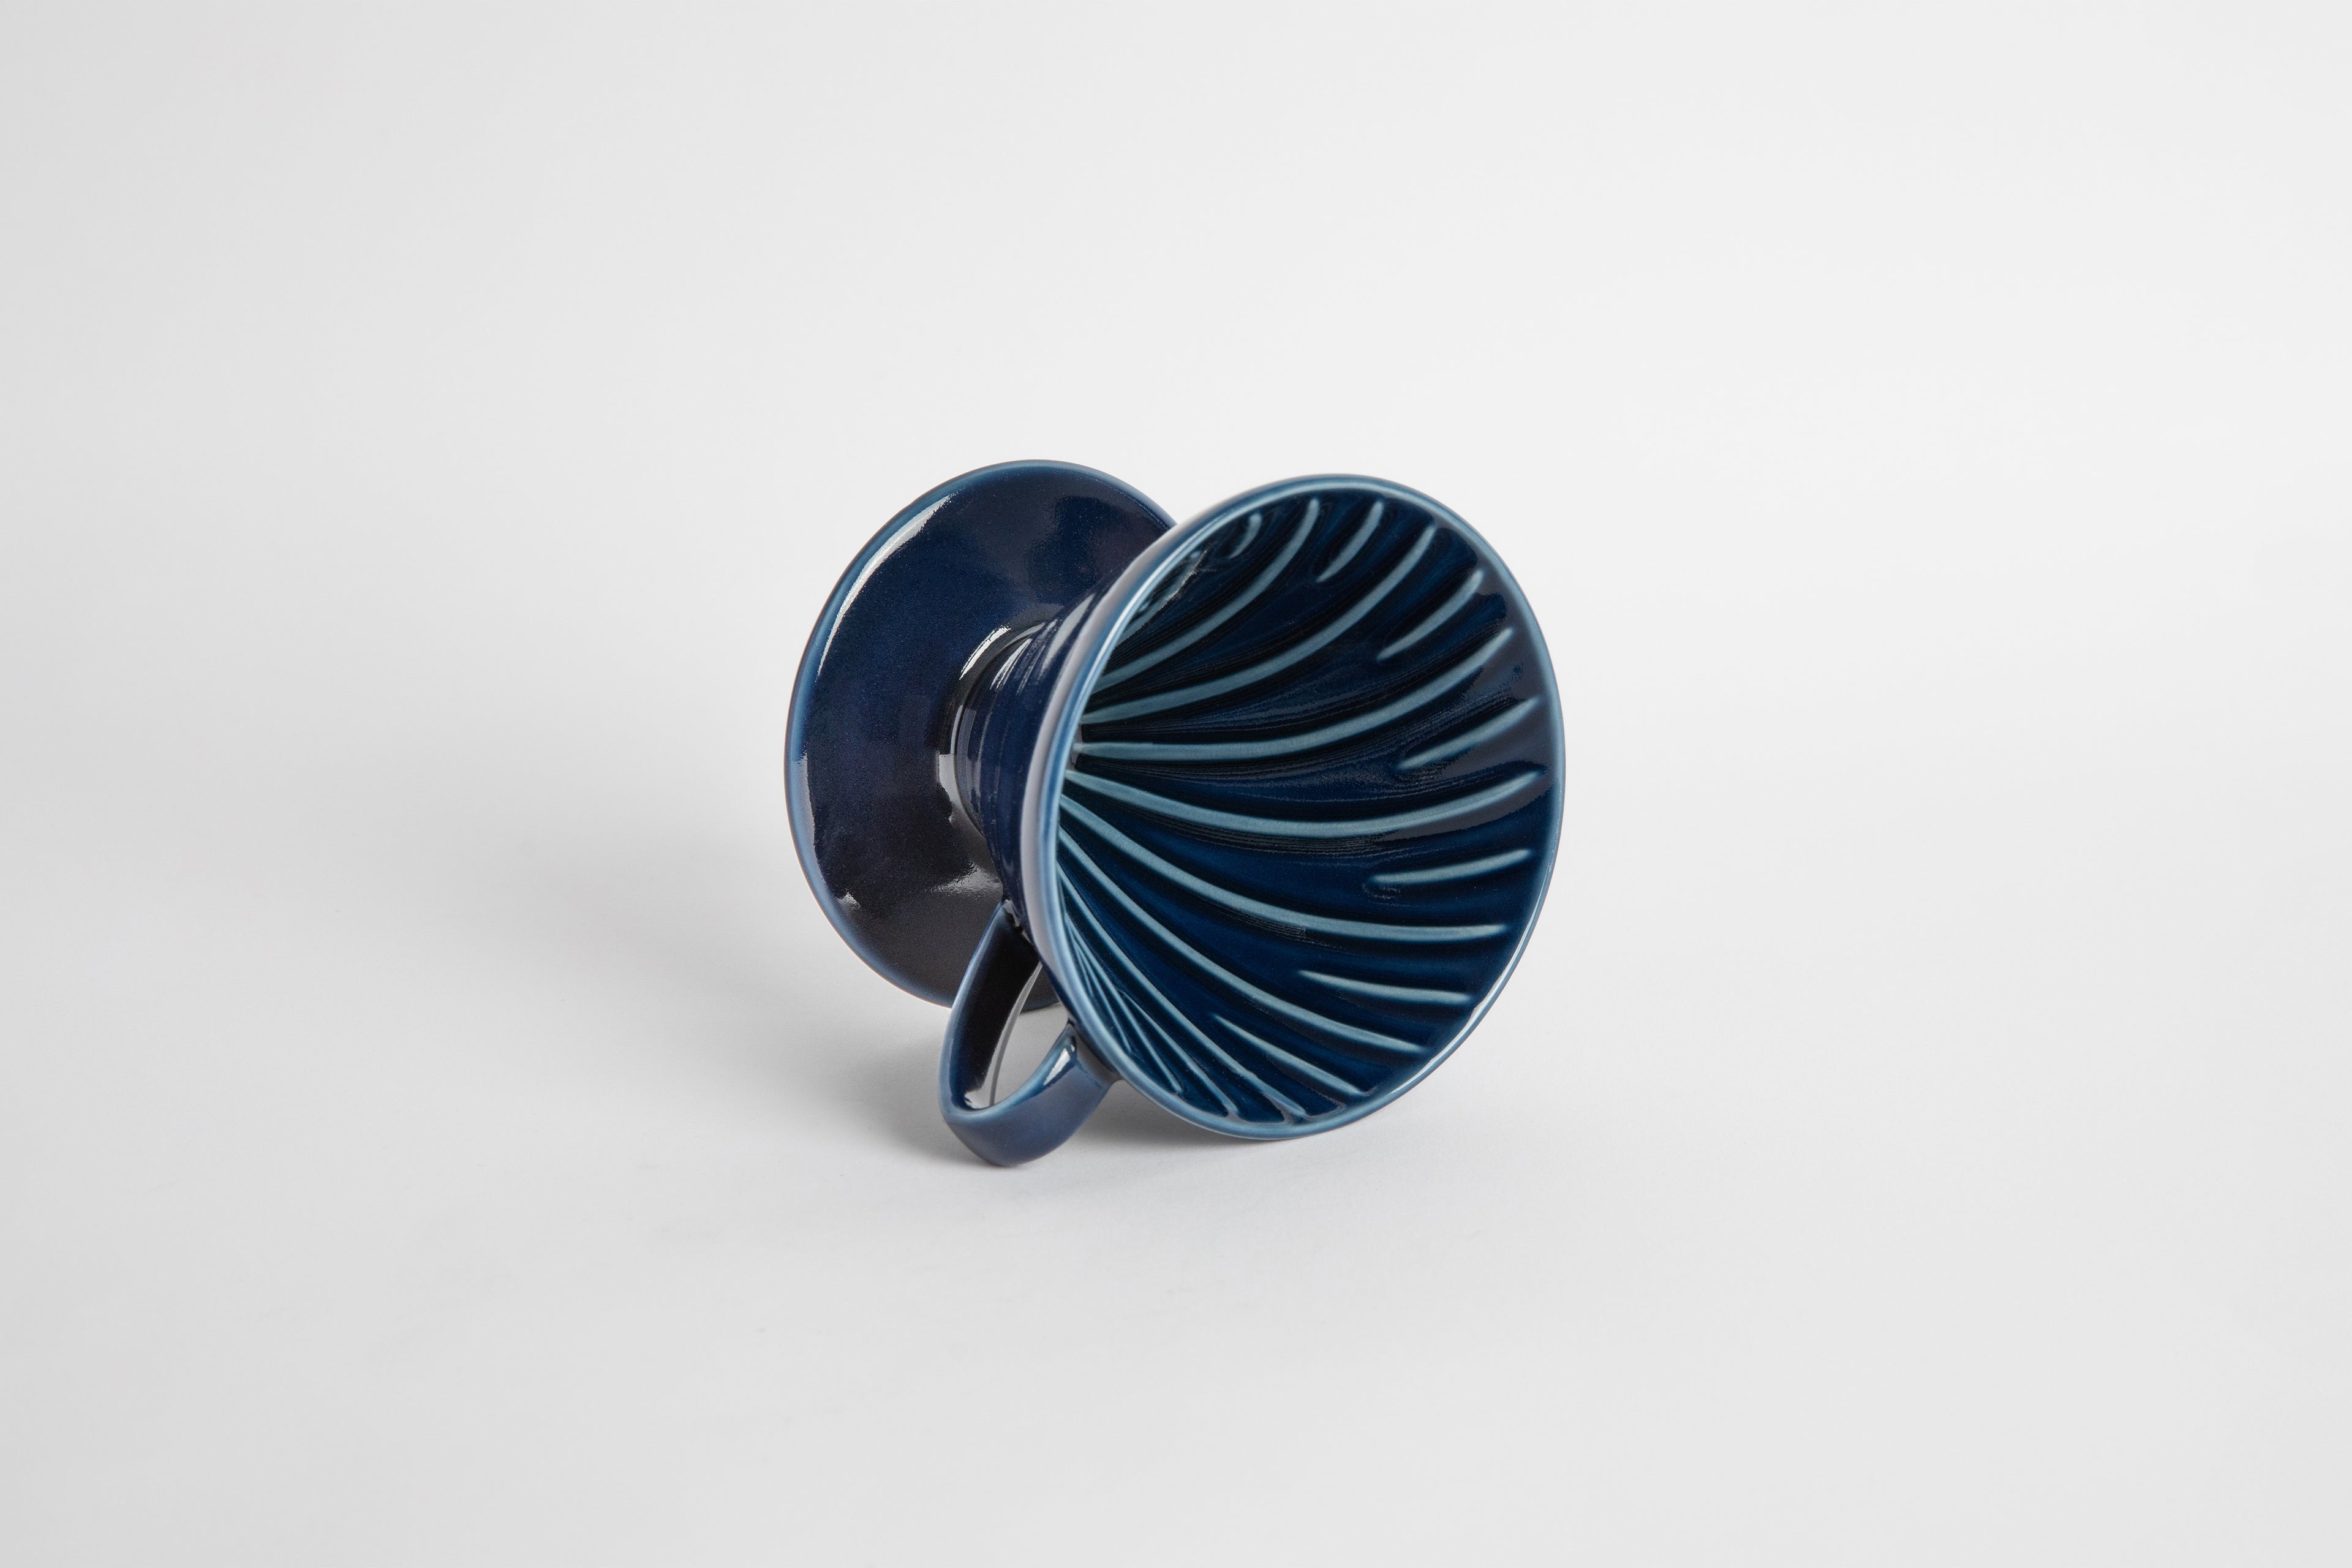 Navy colored 60 degree cone shaped ceramic coffee dripper with handle and round base. Spiral ribbed on the inside cone. Set on white background